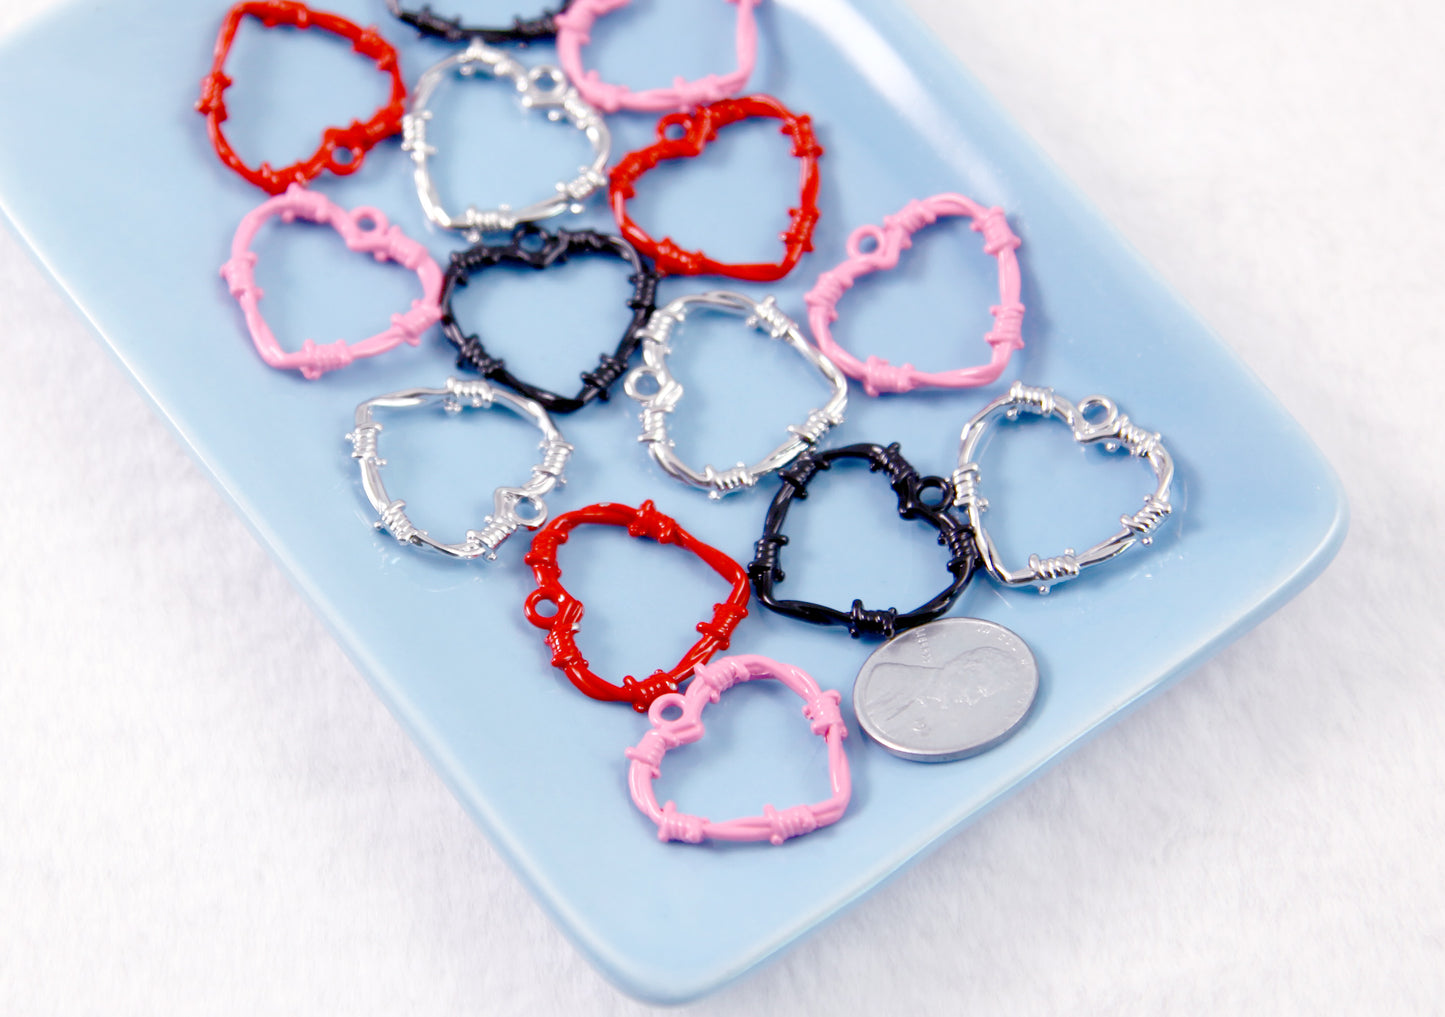 25mm Metal Barbed Wire Heart Charms - 8 pc set - Barb Wire Hearts Charm - Easy to Use in Jewelry